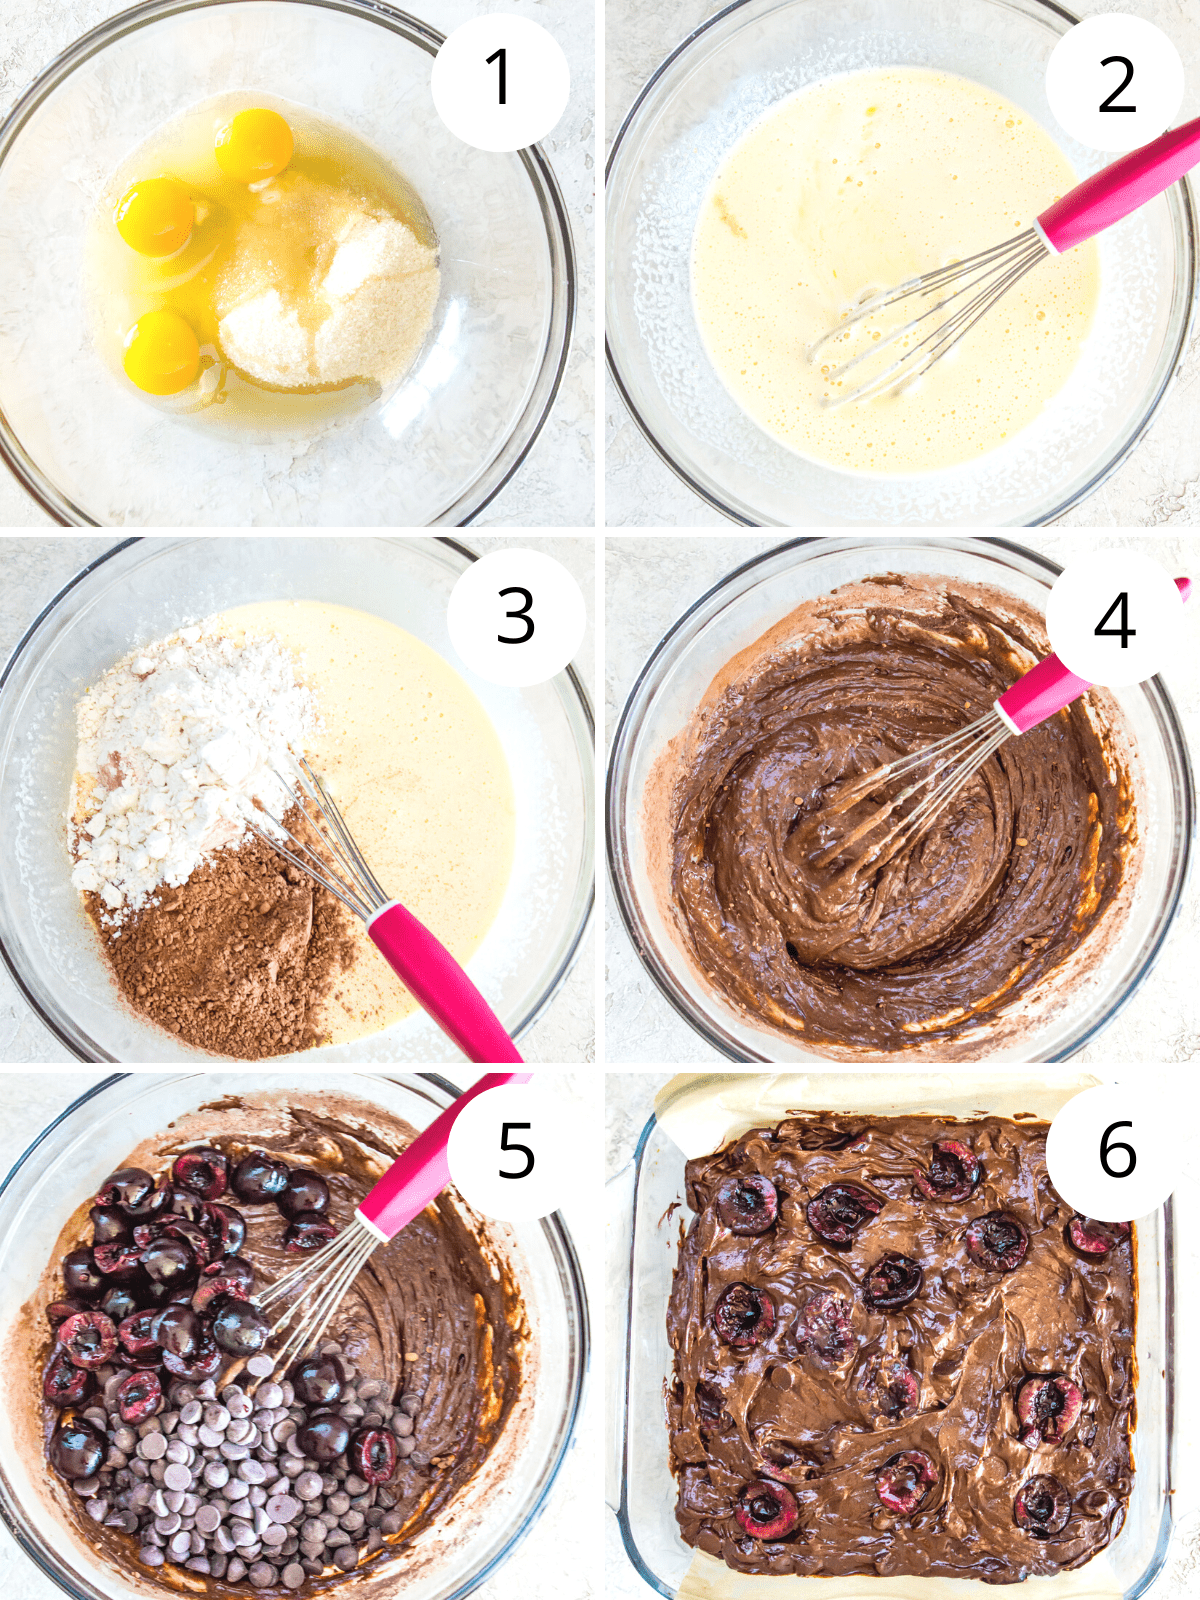 Step by step directions for making cherry brownies.